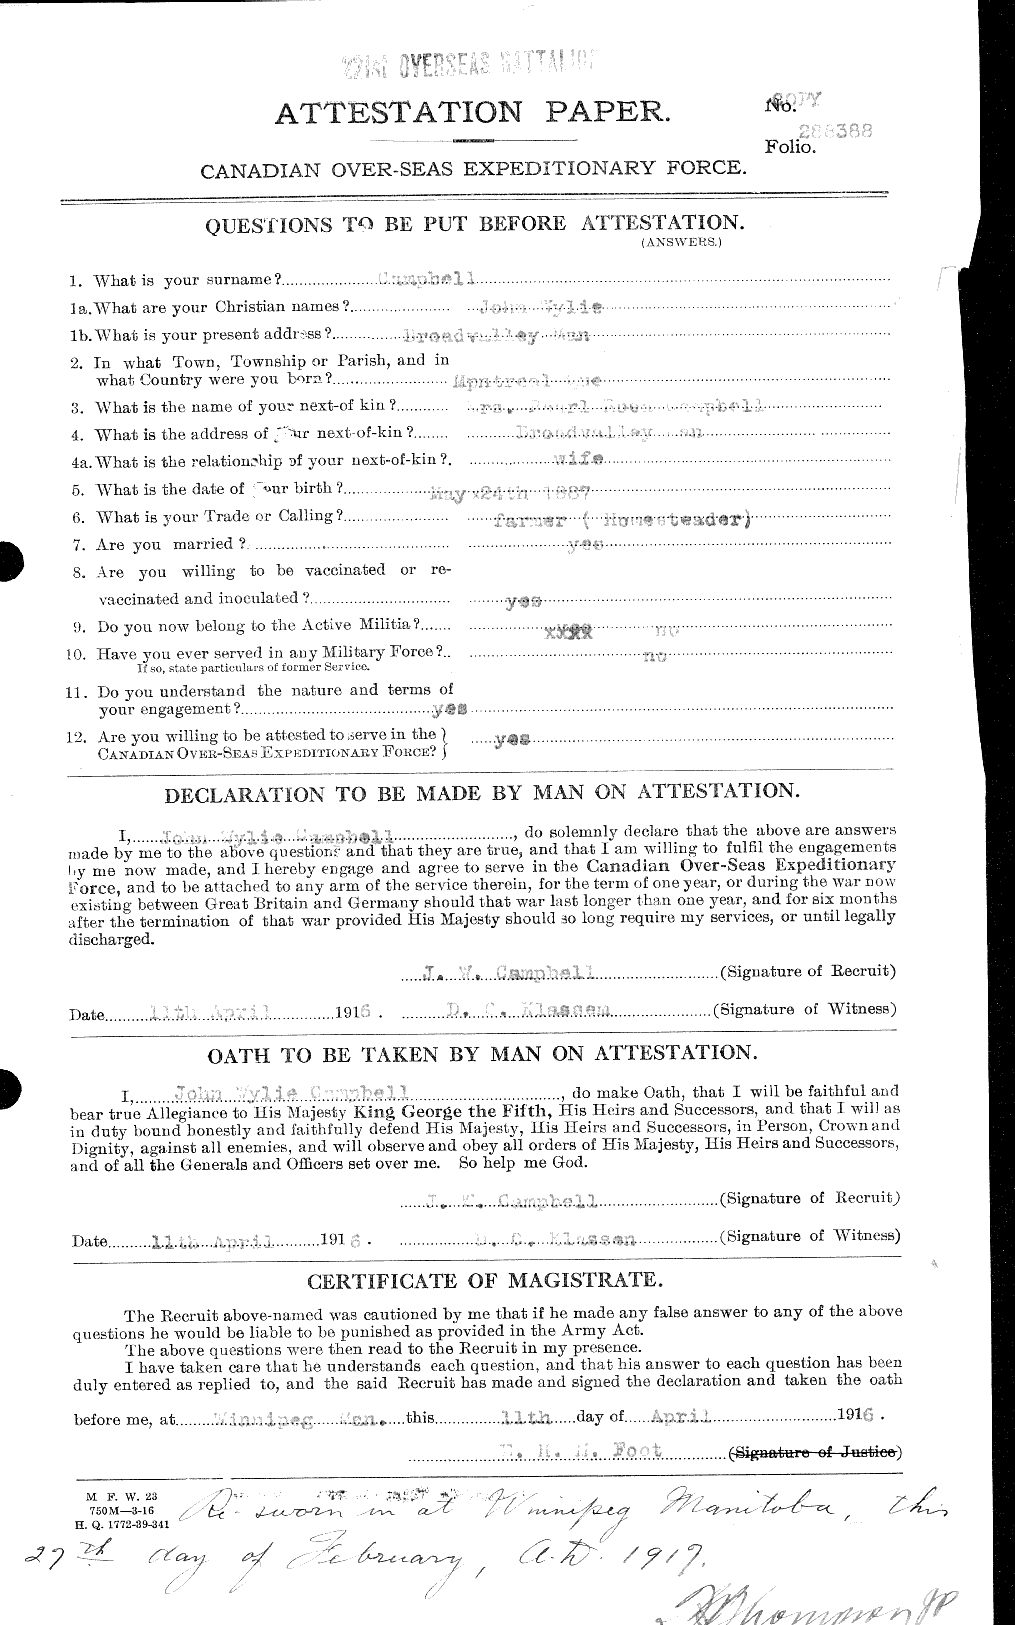 Personnel Records of the First World War - CEF 003812a